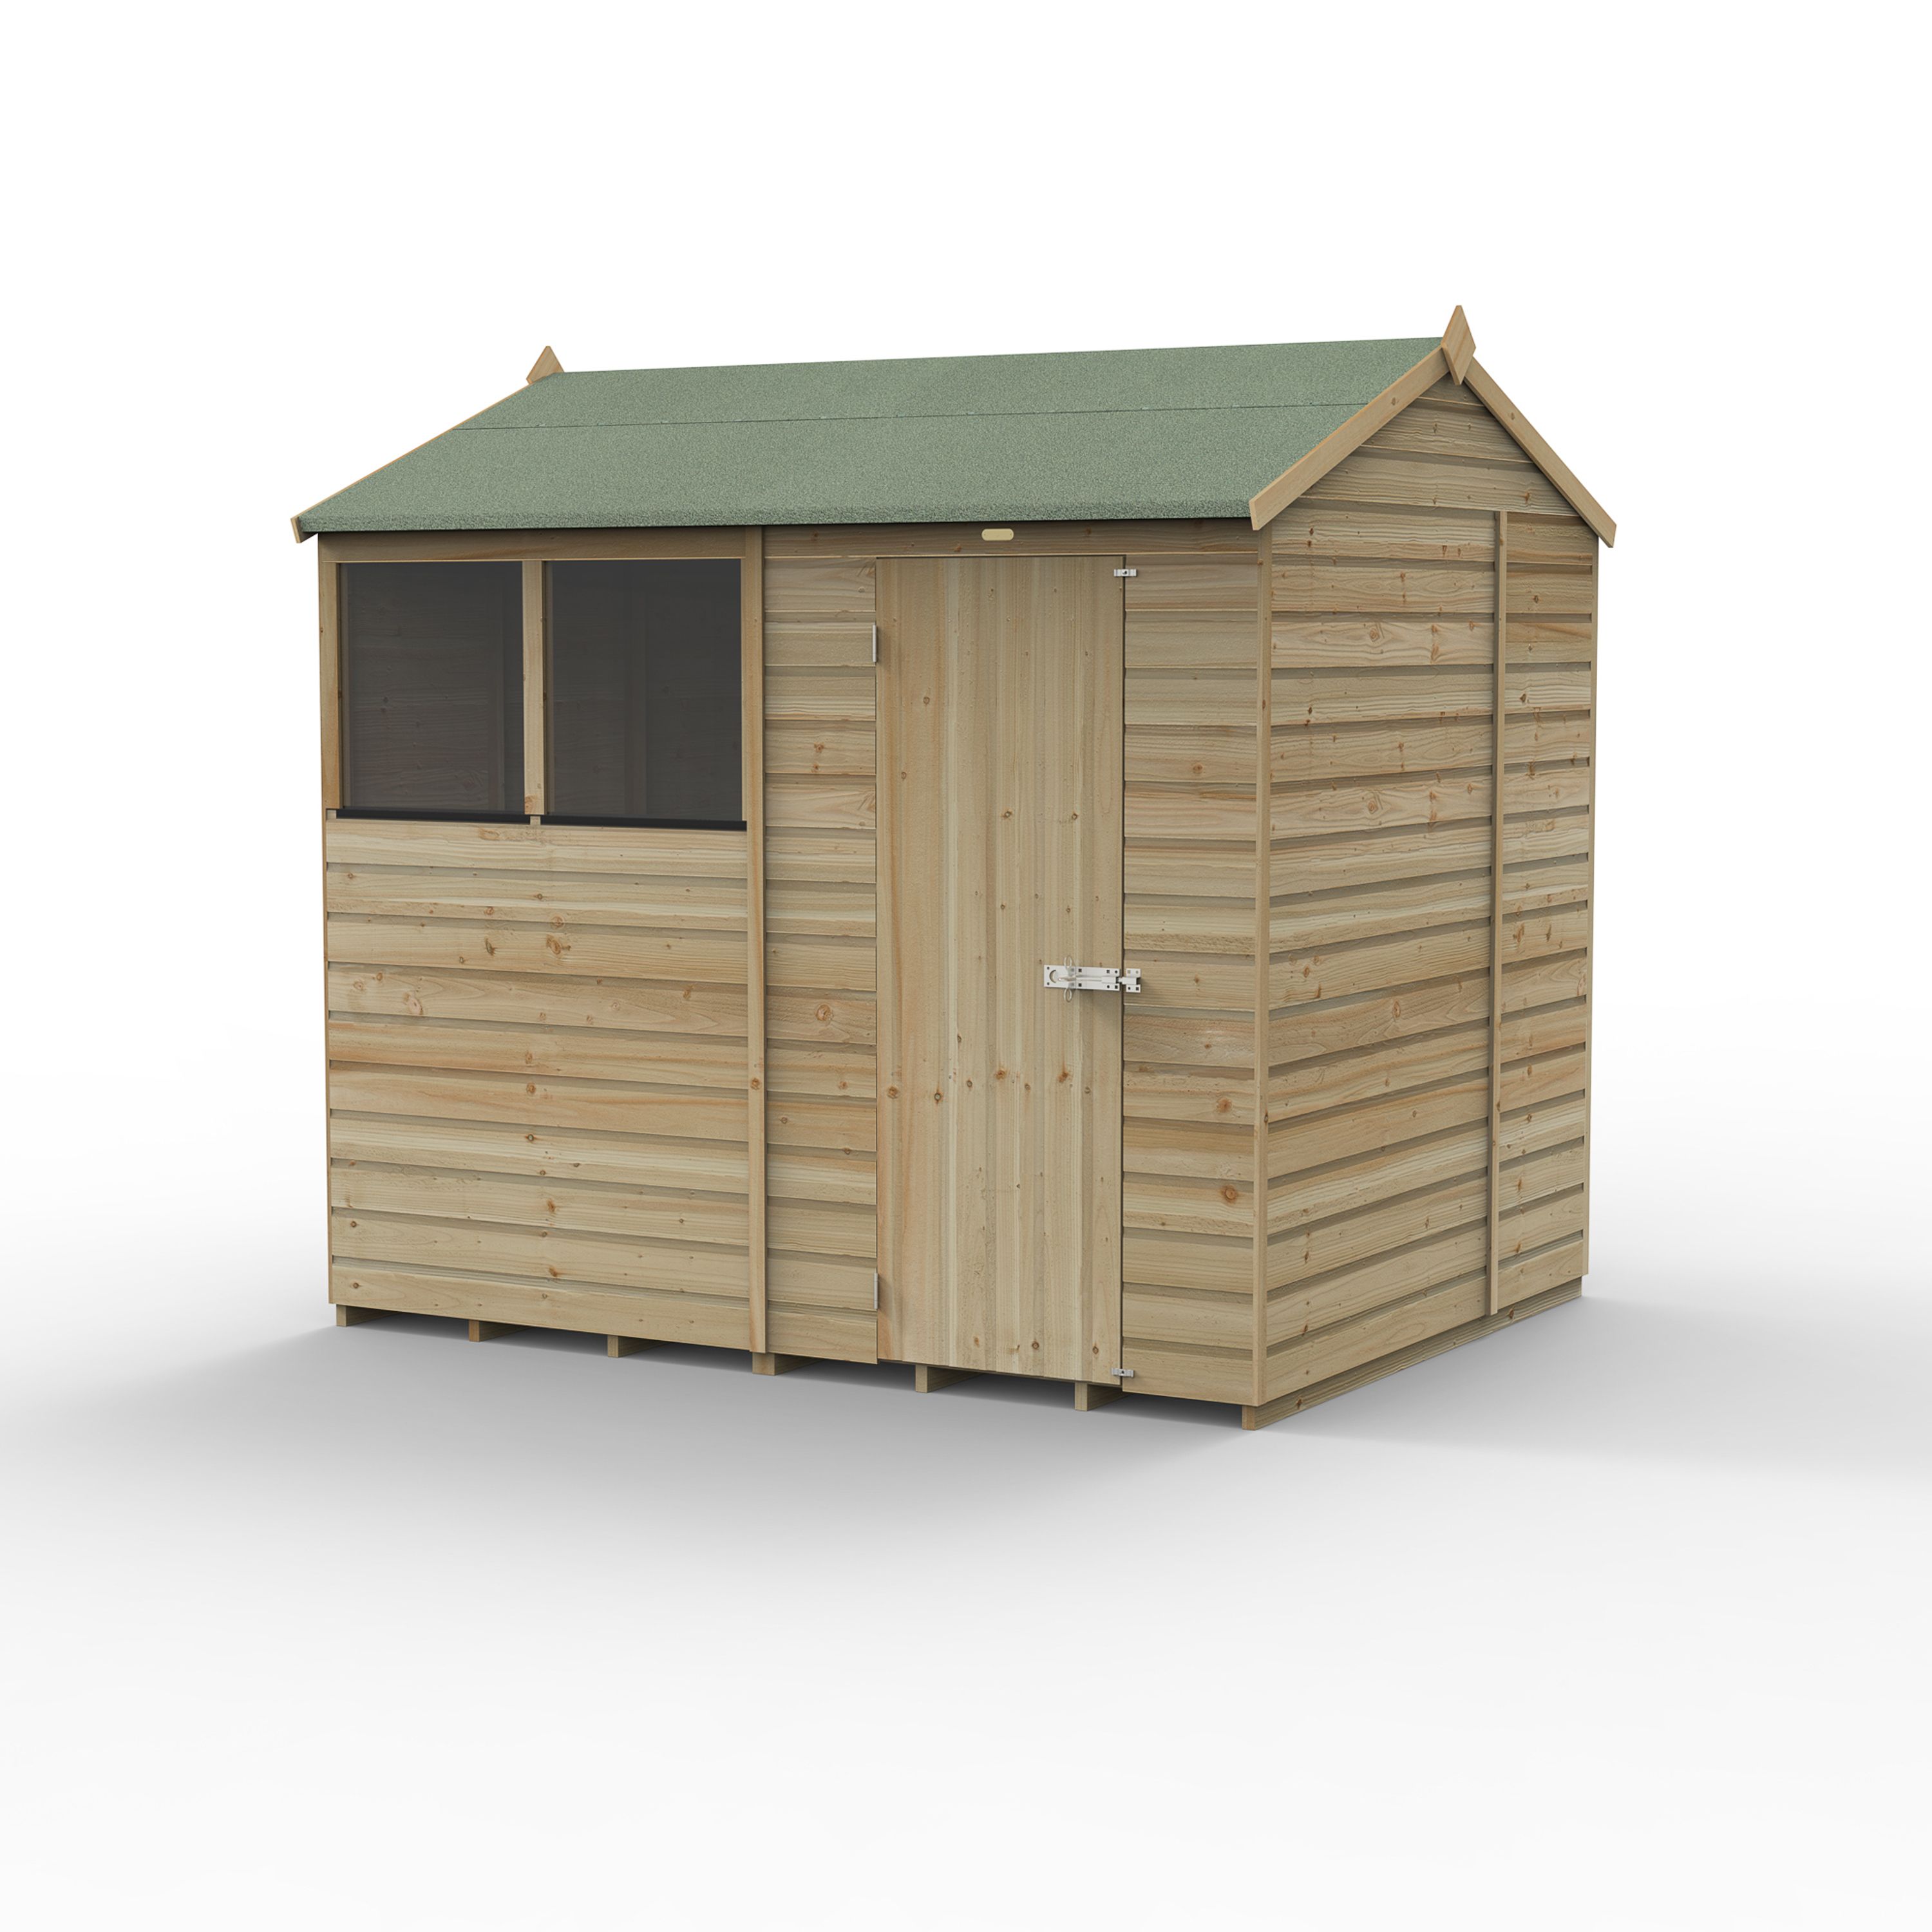 Forest Garden Beckwood 8x6 ft Reverse apex Natural timber Wooden Shed with floor & 2 windows (Base included)